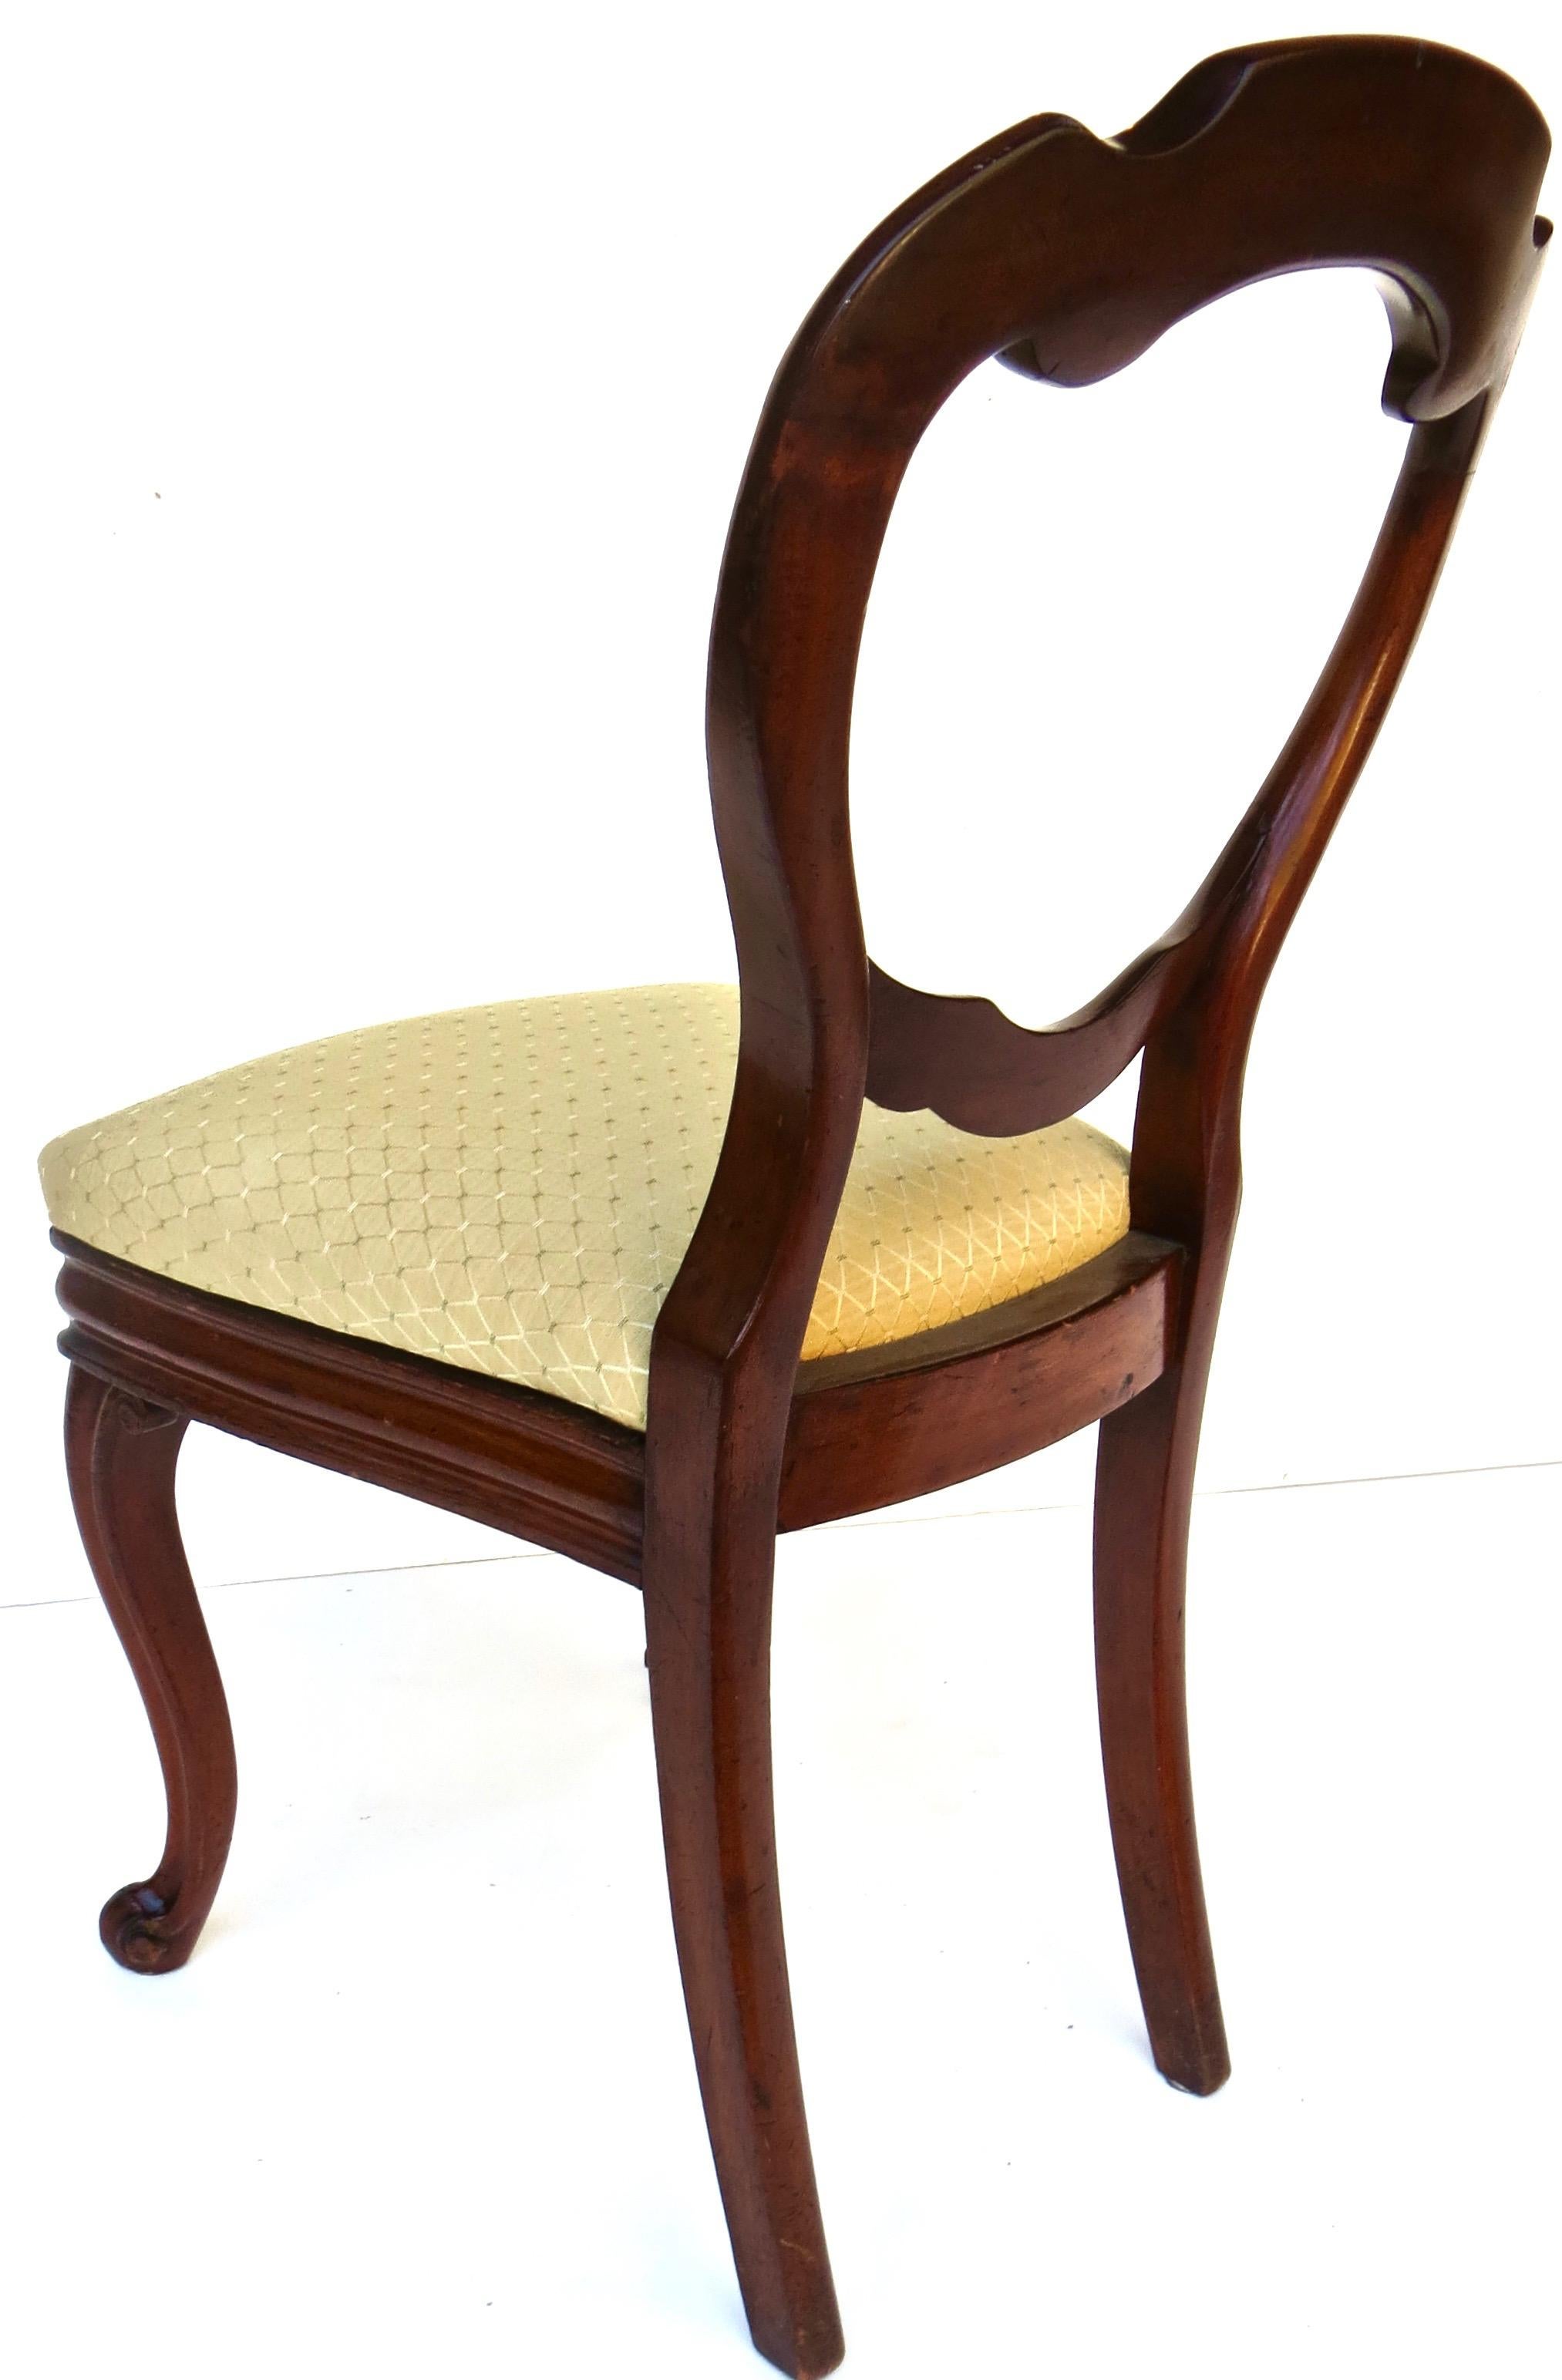 Hand-Carved Traditional Victorian Balloon Back Side Chair, English, Circa 1850 For Sale